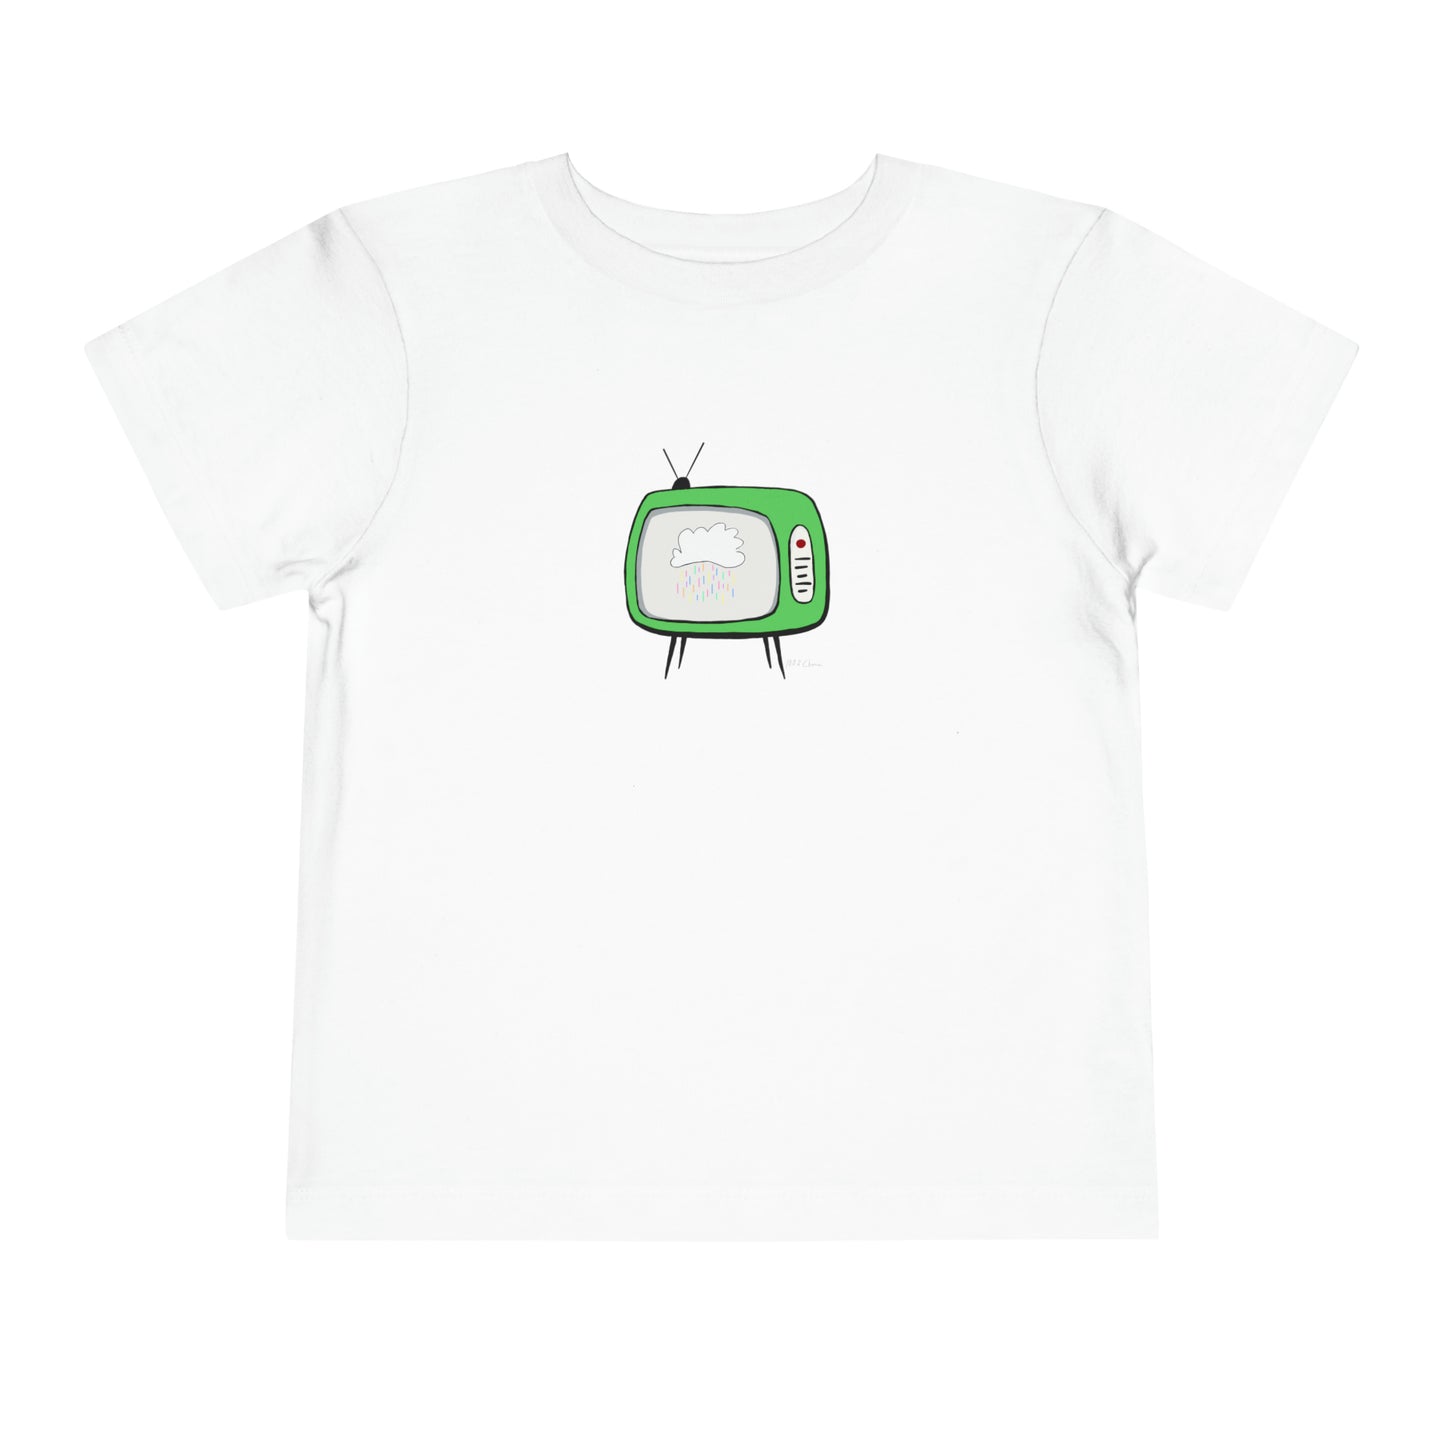 100% Chance of Sprinkles Toddler Tee